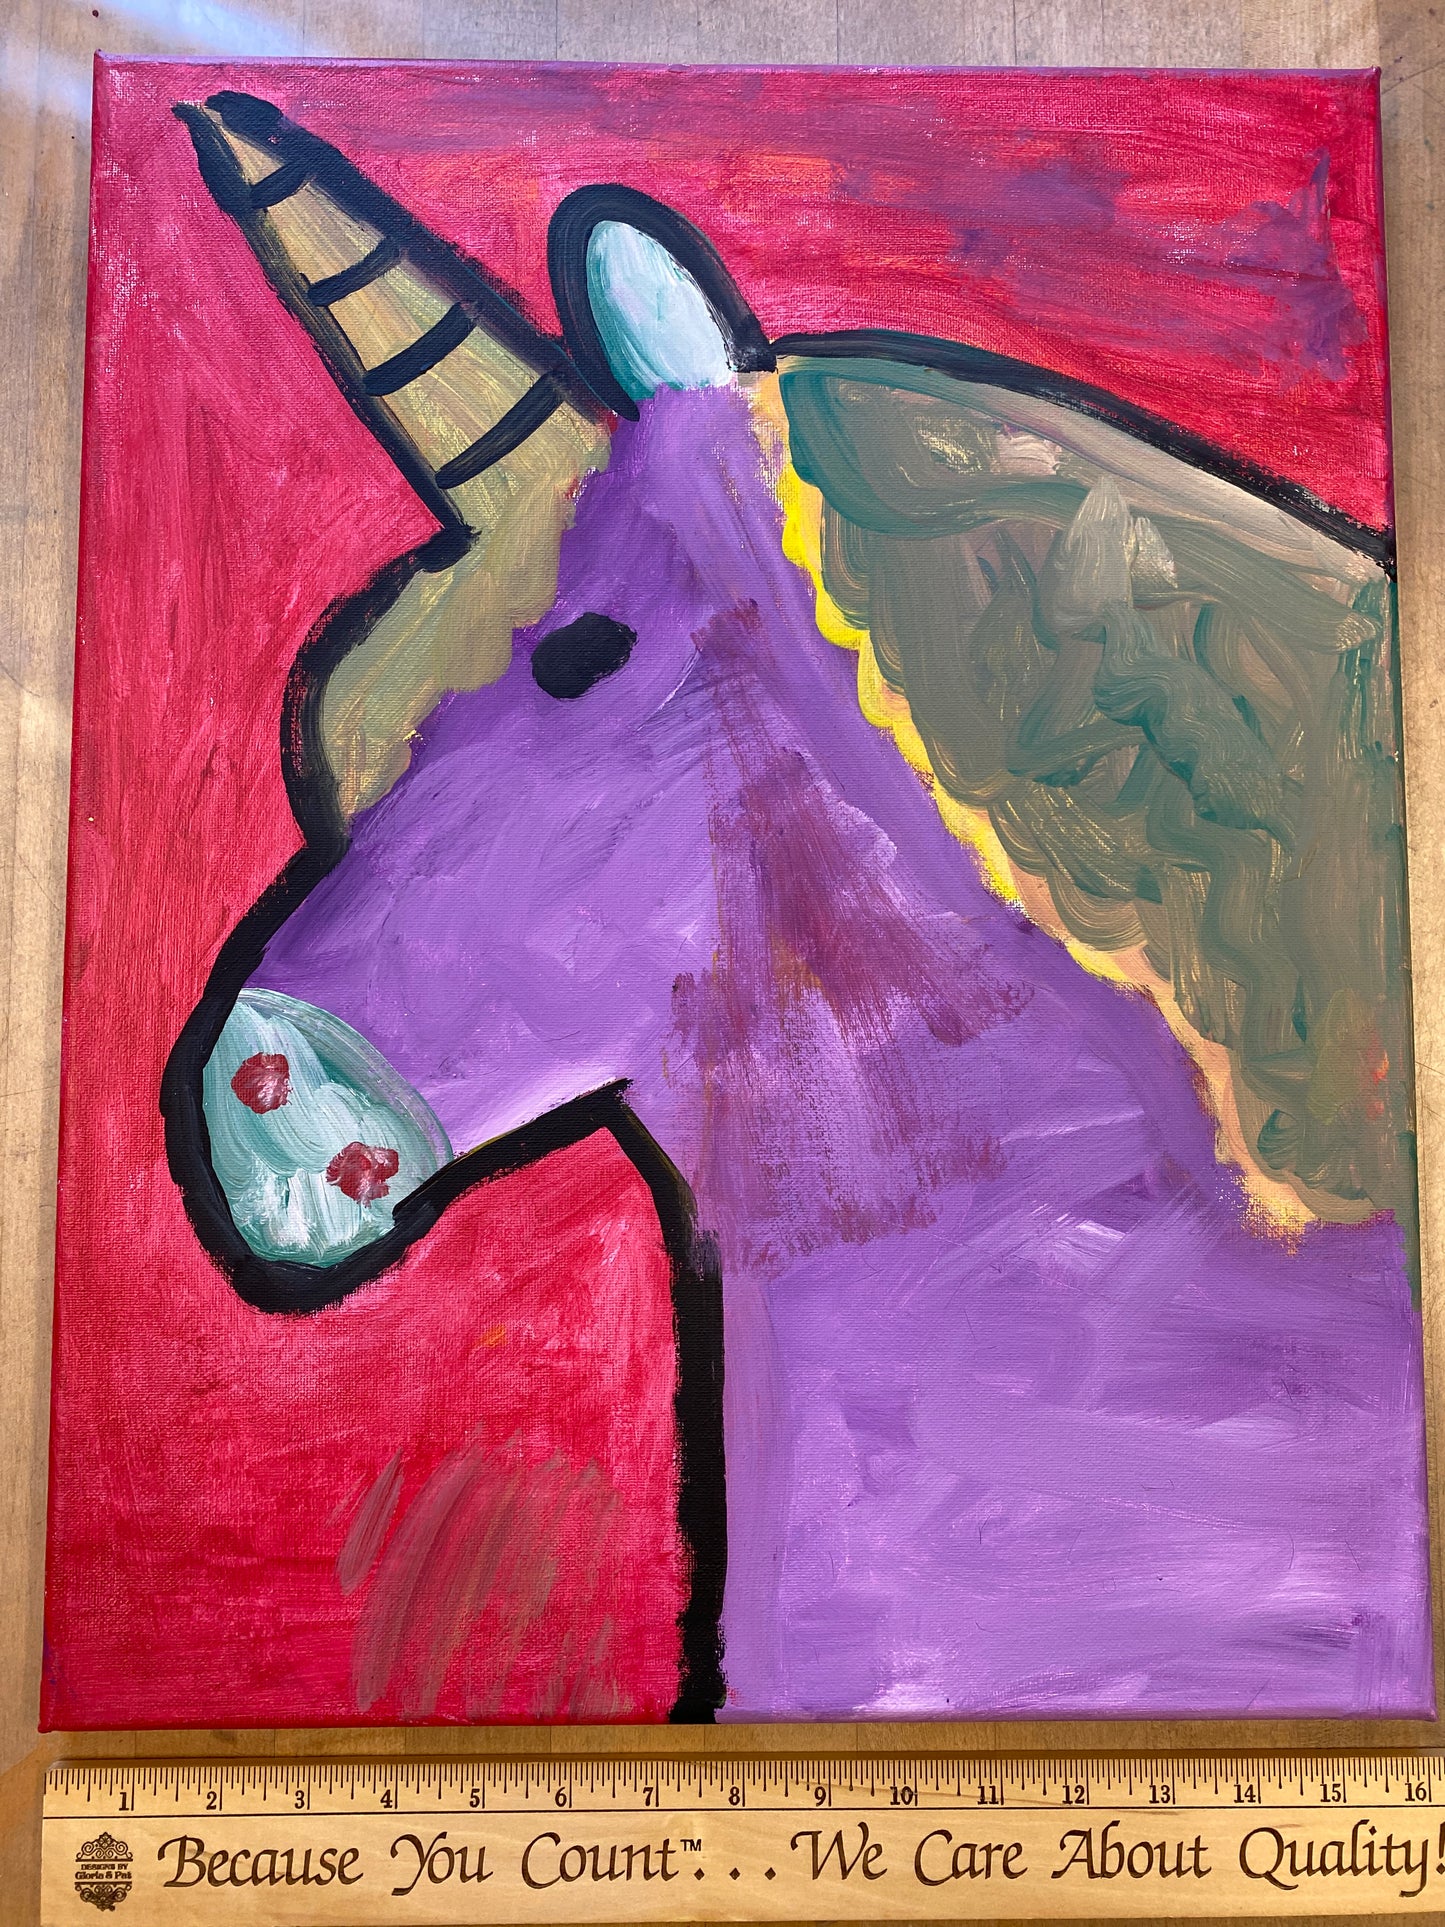 Acrylic Paint on Stretched Canvas, 20 x 16 Original Fine Art, Unicorn made by Emily Knoles